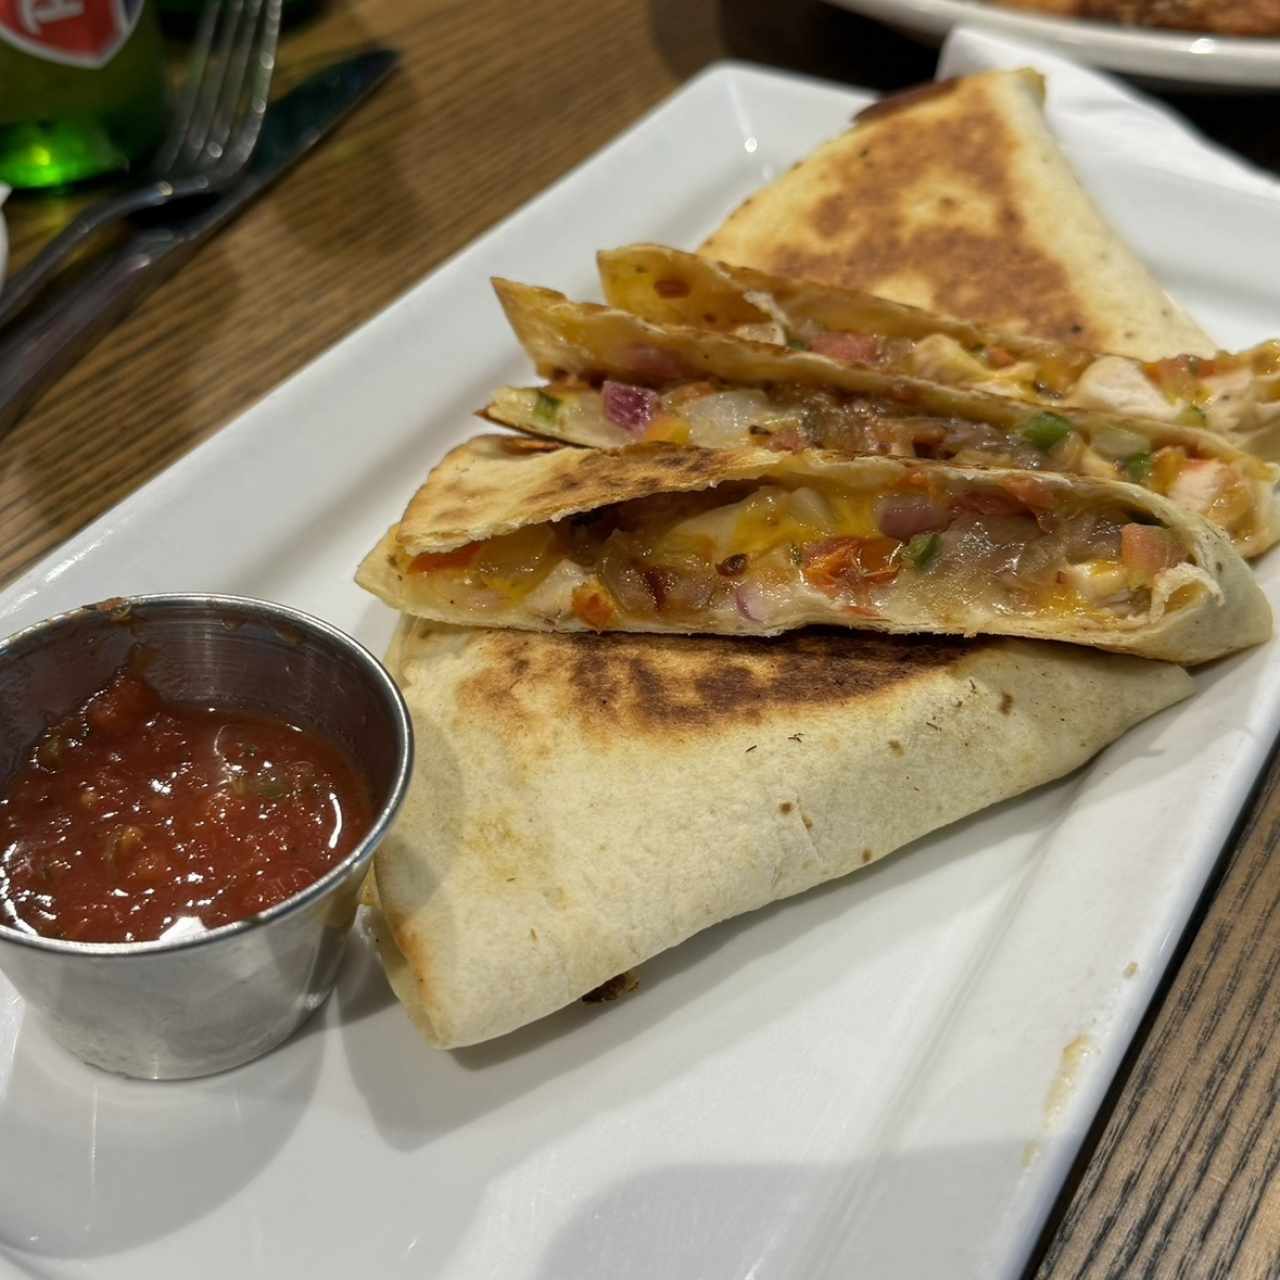 Appetizers - GRILLED CHICKEN QUESADILLAS